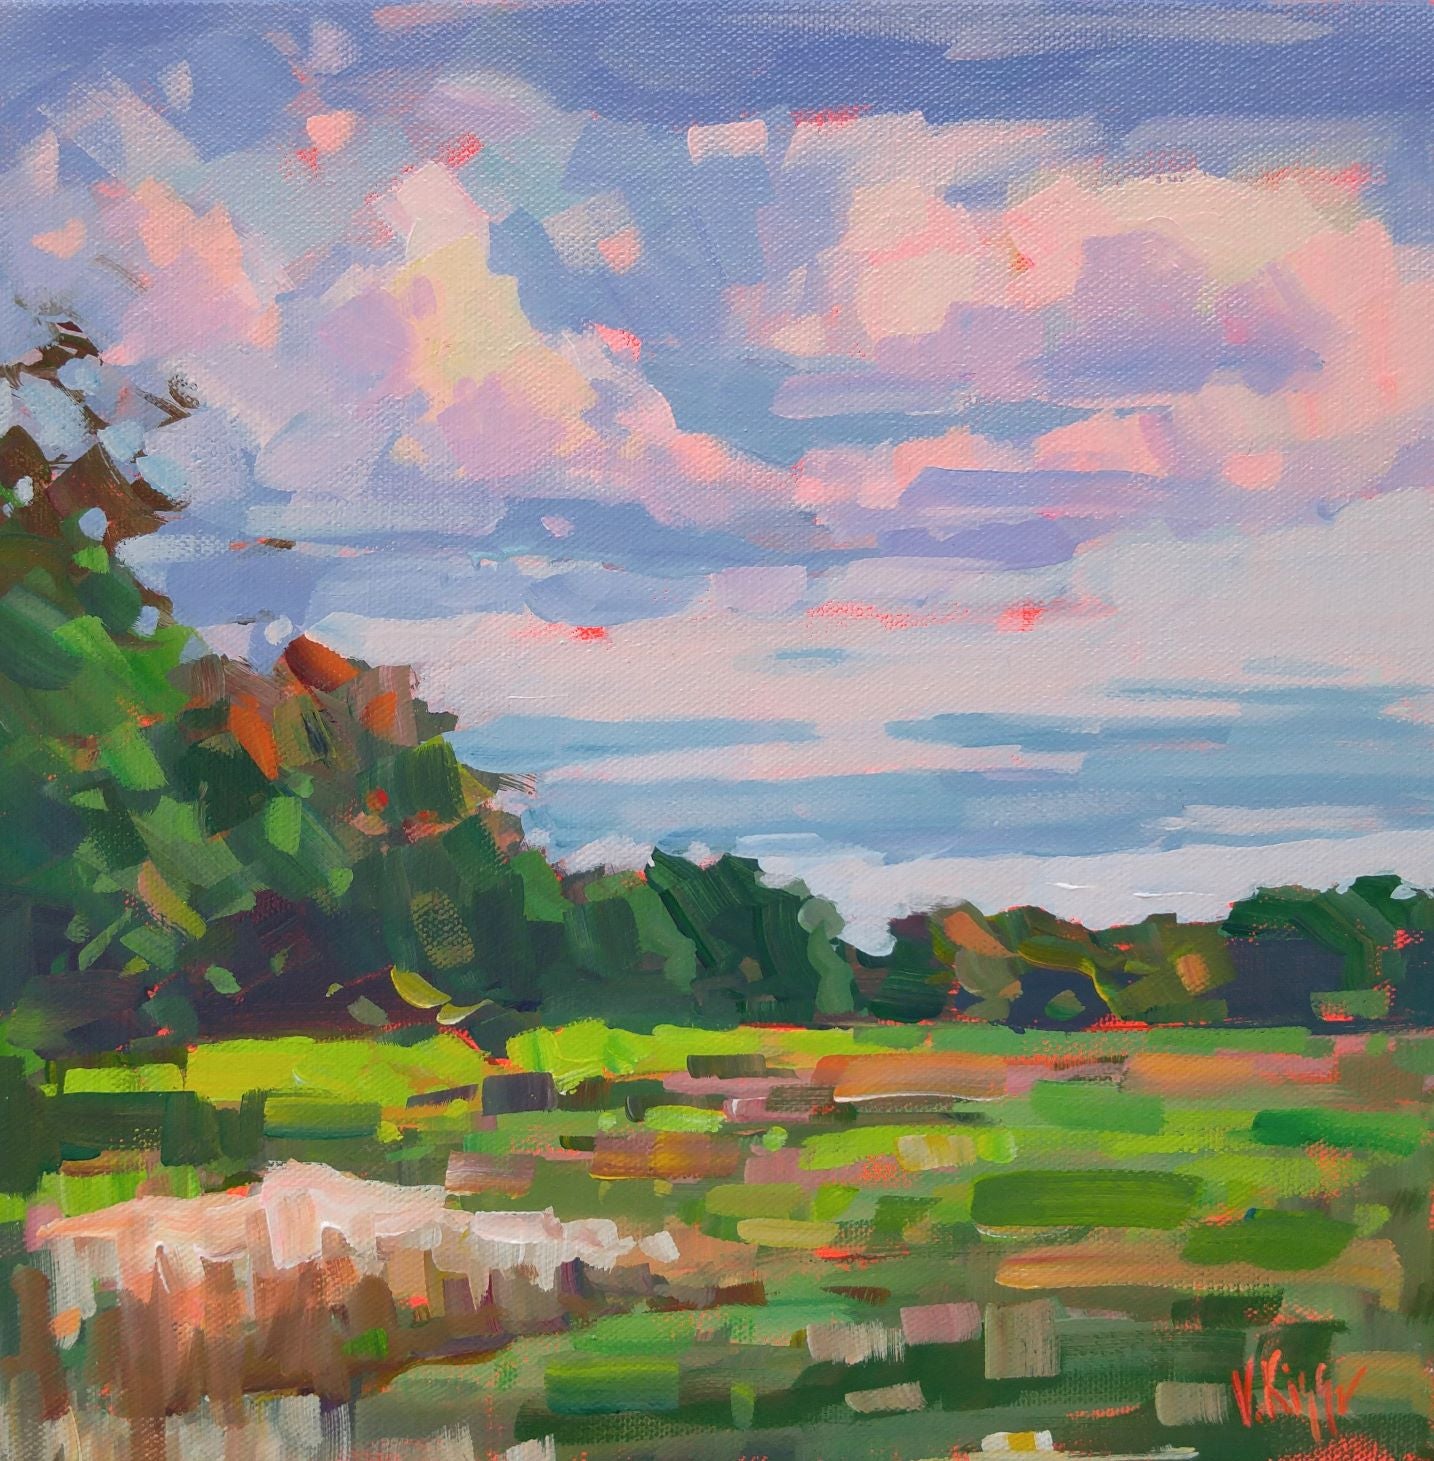 Field and Sky original painting for sale Impressionistic landscape by Vera Kisseleva